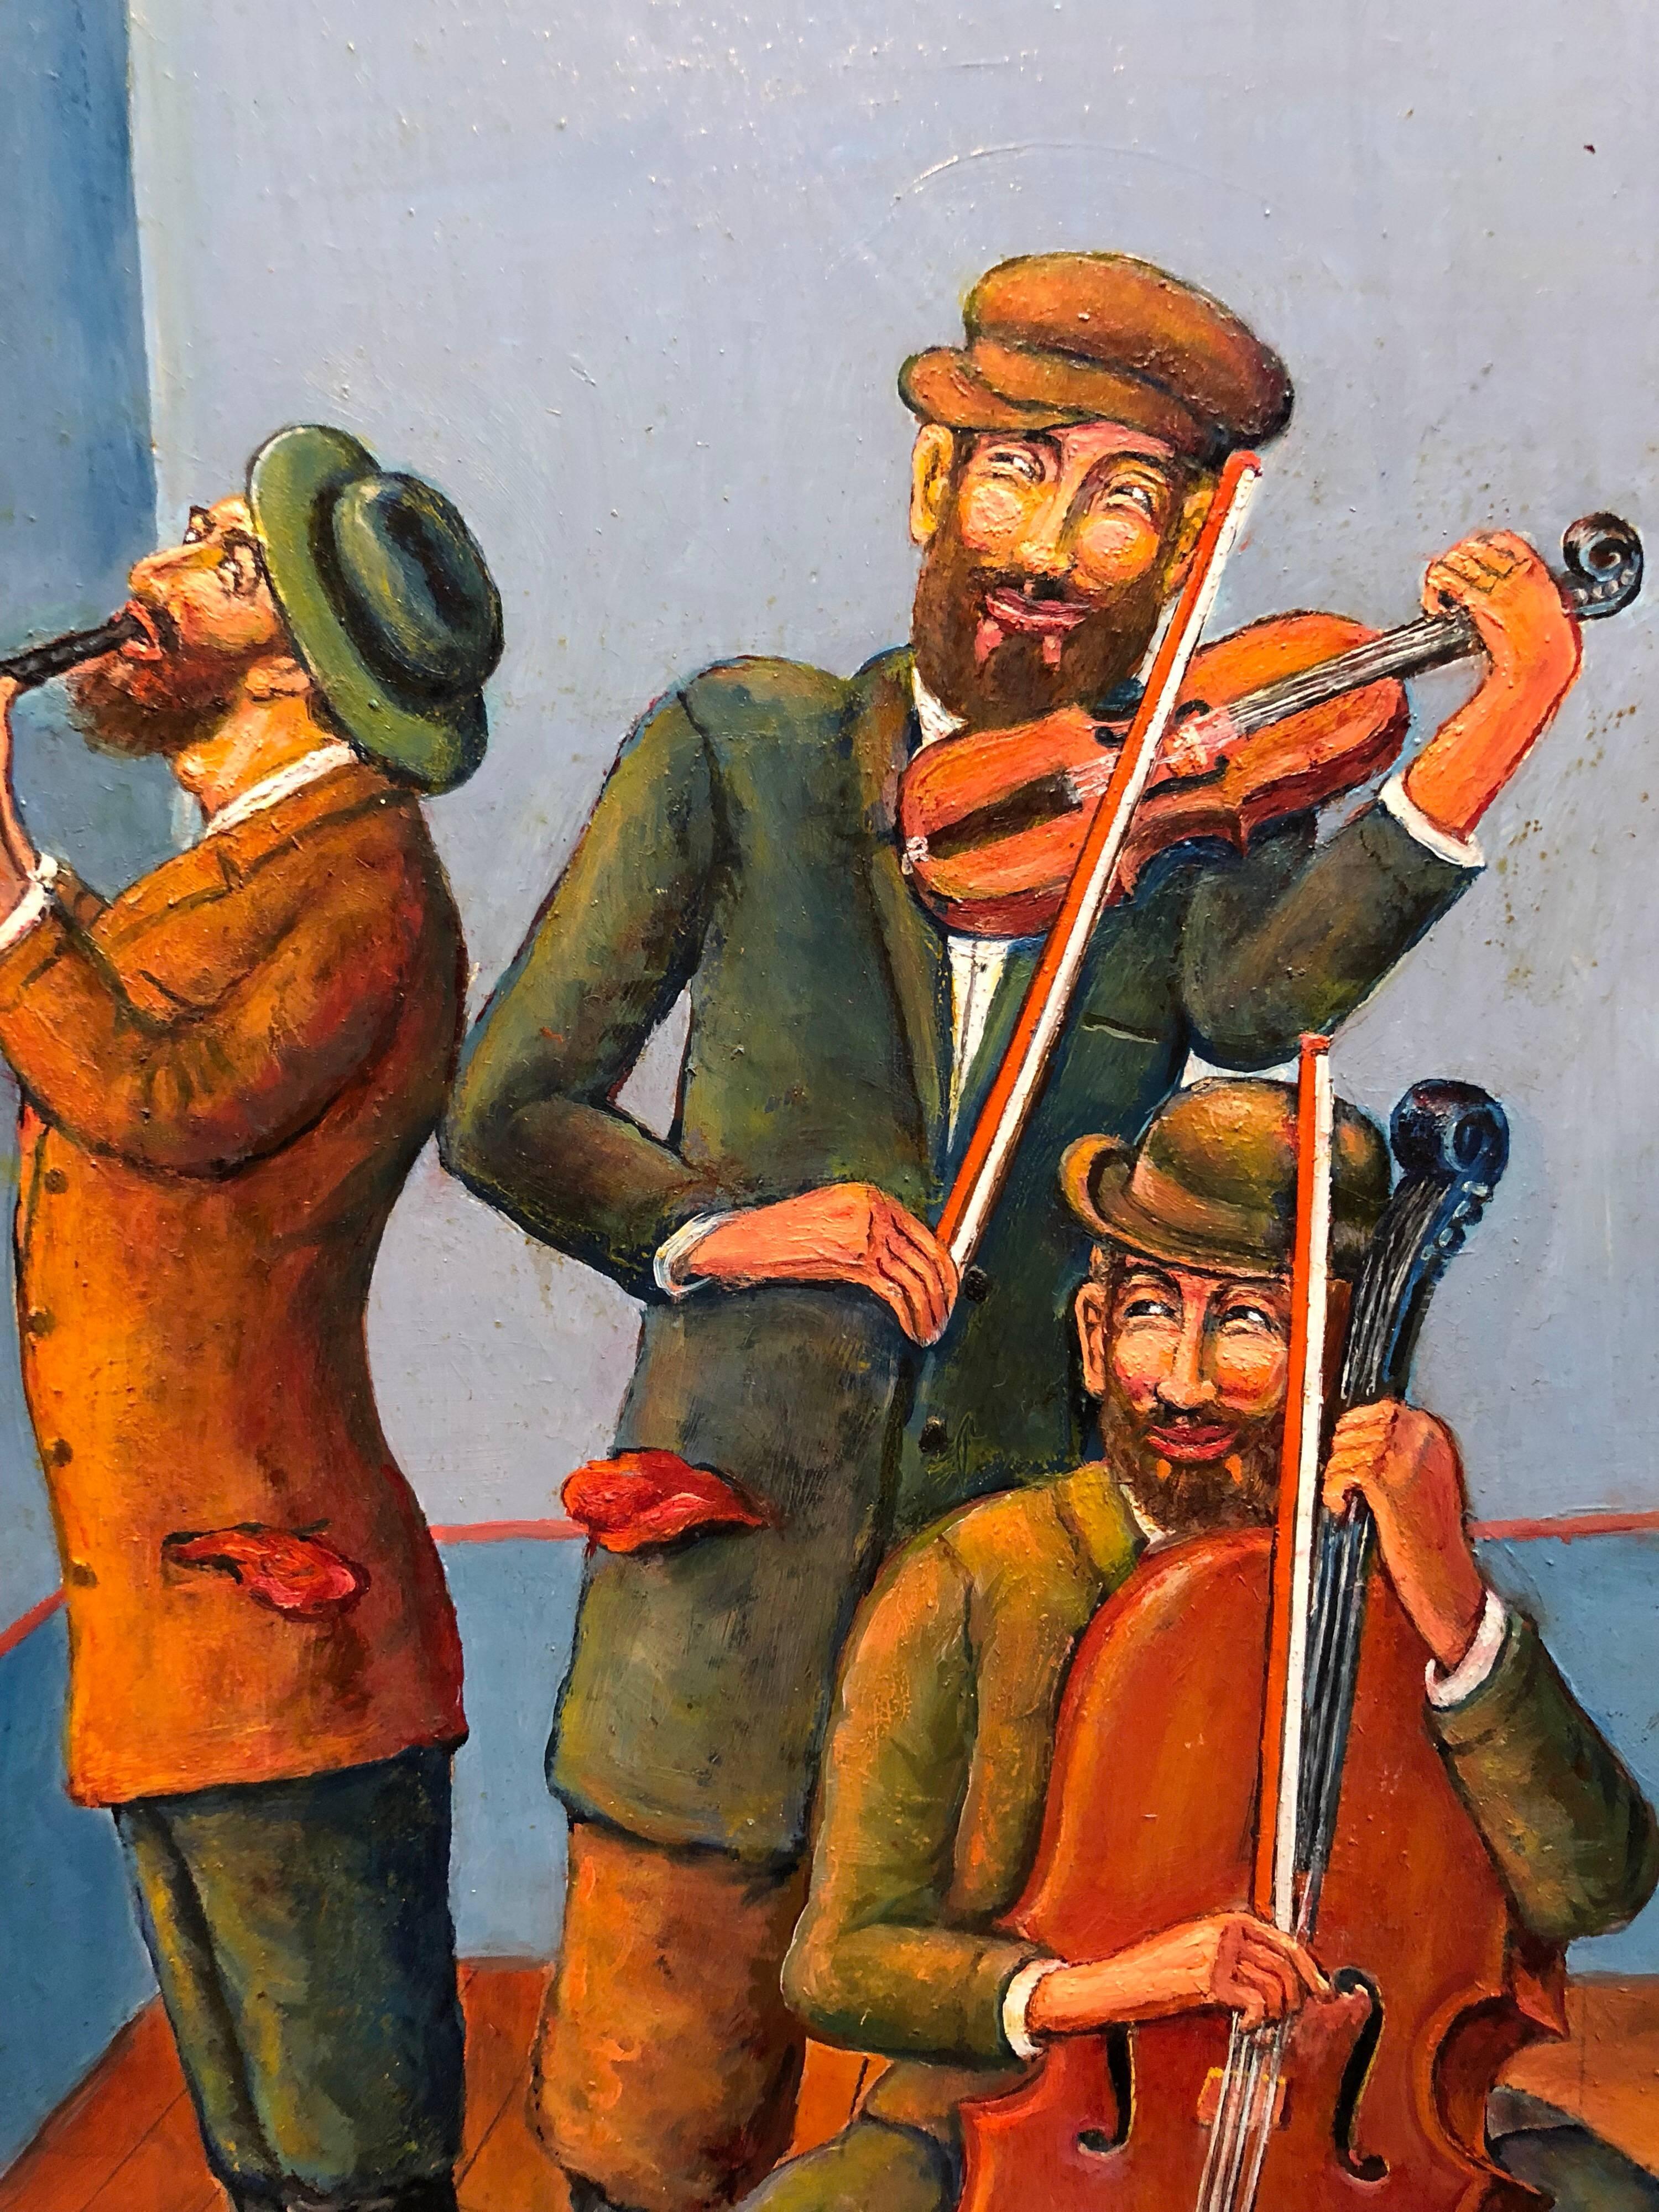 Genre: Modern
Subject: Klezmer Musicians
Medium: Oil
Surface: Board, size includes artist decorated frame without frame 16X12
Country: United States

The imagery of Maurice Kish (1895-1987), whether factories or carousels, reliably subverts